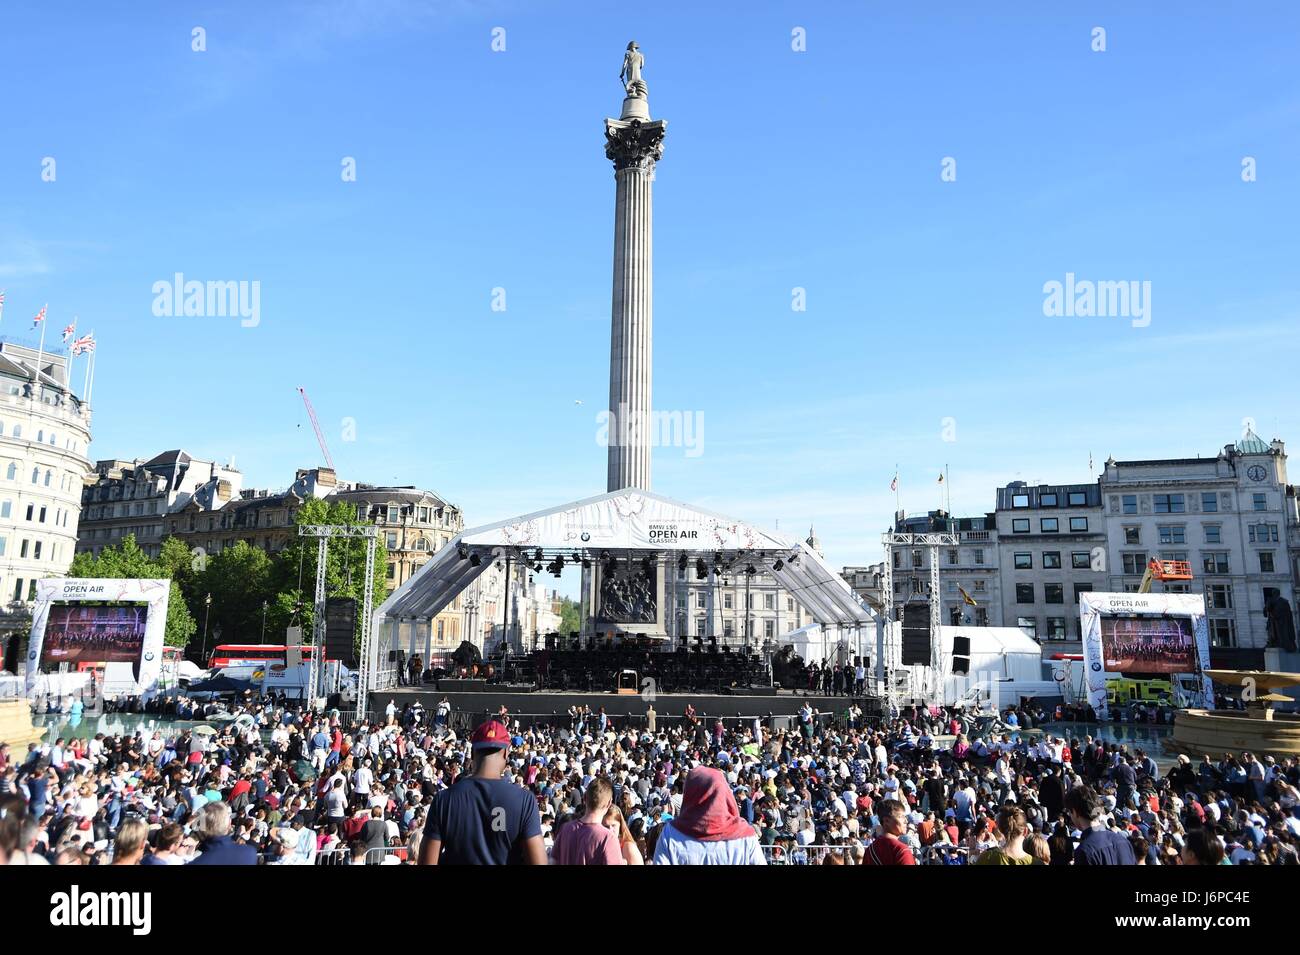 The audience waiting in Trafalgar Square, central London, for the London Symphony Orchestra to play a programme of Rachmaninov. Stock Photo